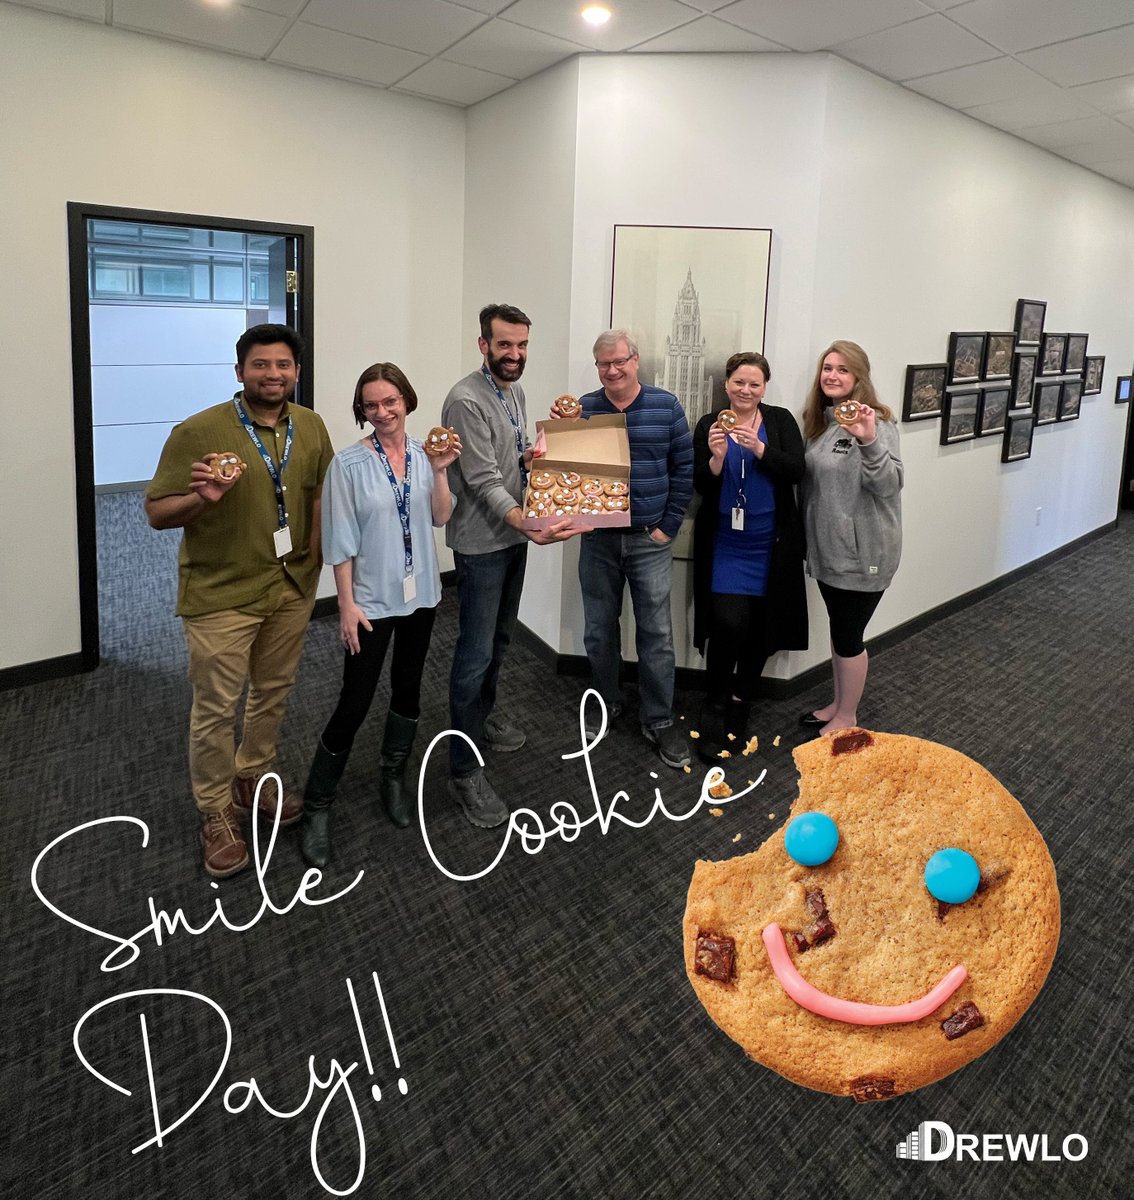 It is Smile Cookie™ Day at Drewlo! 🍪 

100% of the proceeds will support local charities and organizations in our community! 😊

#SmileCookieDay #DrewloCommunity #SpreadJoy #SupportLocalCharities #CommunityLove #SmileCookie #TimHortons #CharitySupport